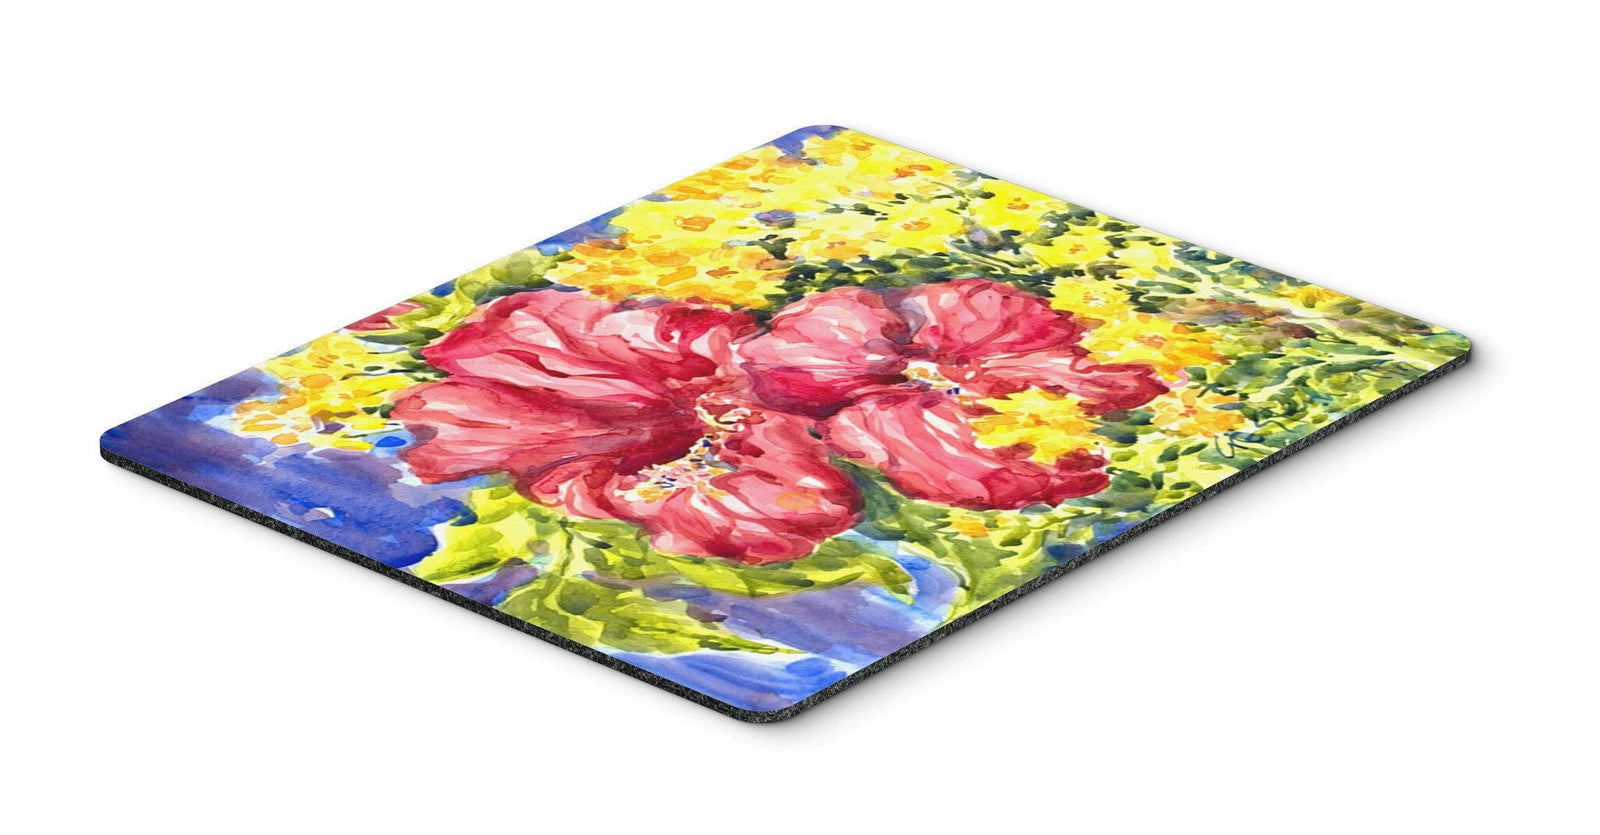 Flower - Hibiscus Mouse pad, hot pad, or trivet by Caroline's Treasures